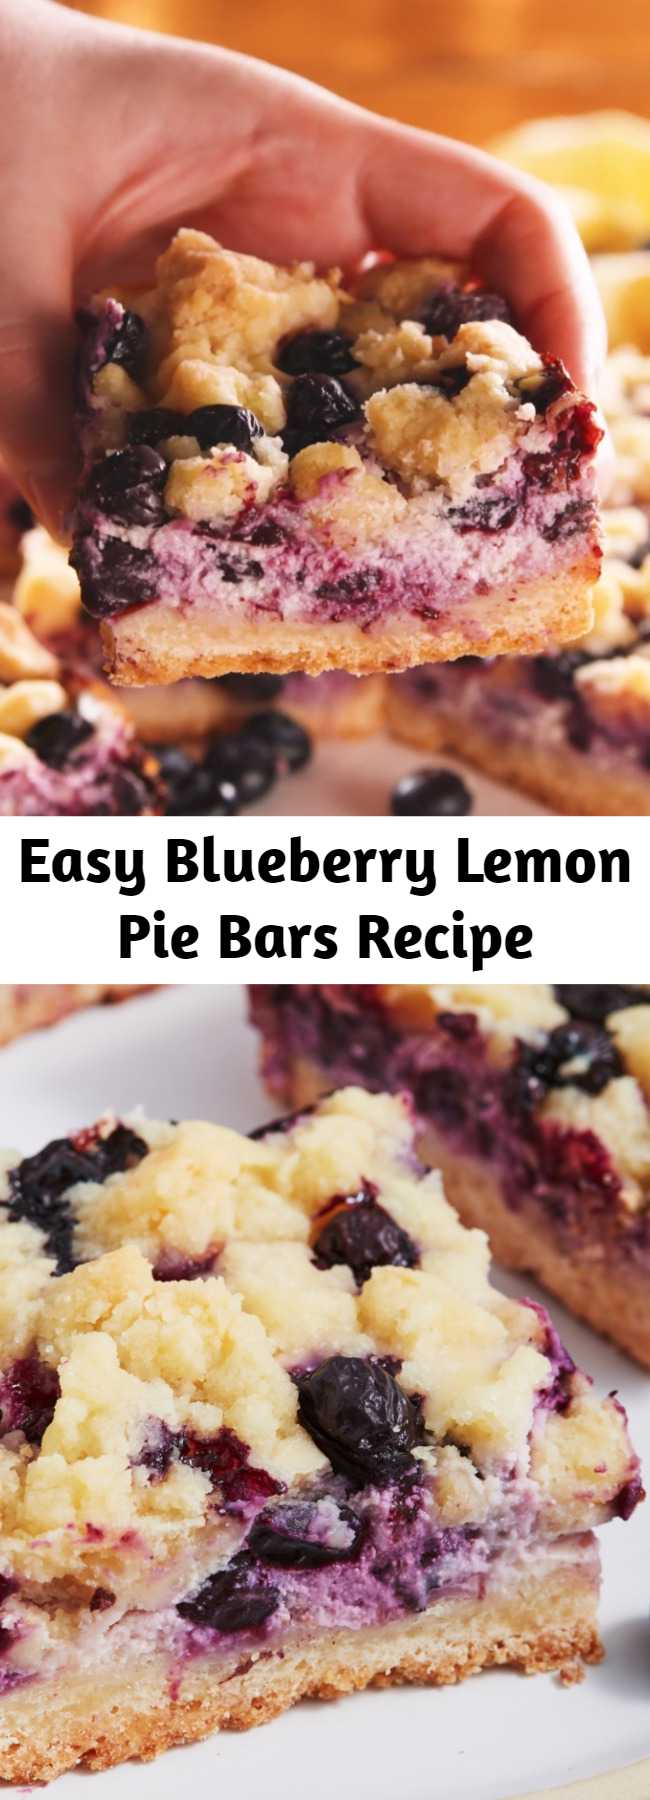 Easy Blueberry Lemon Pie Bars Recipe - Lemons and blueberries go together like spring and sunshine. They are the perfect combo and these cookie pie bars are our favourite yet! Zesty, creamy and with a steusel crumble topping, these flavoursome bars are like sunshine in cake form.